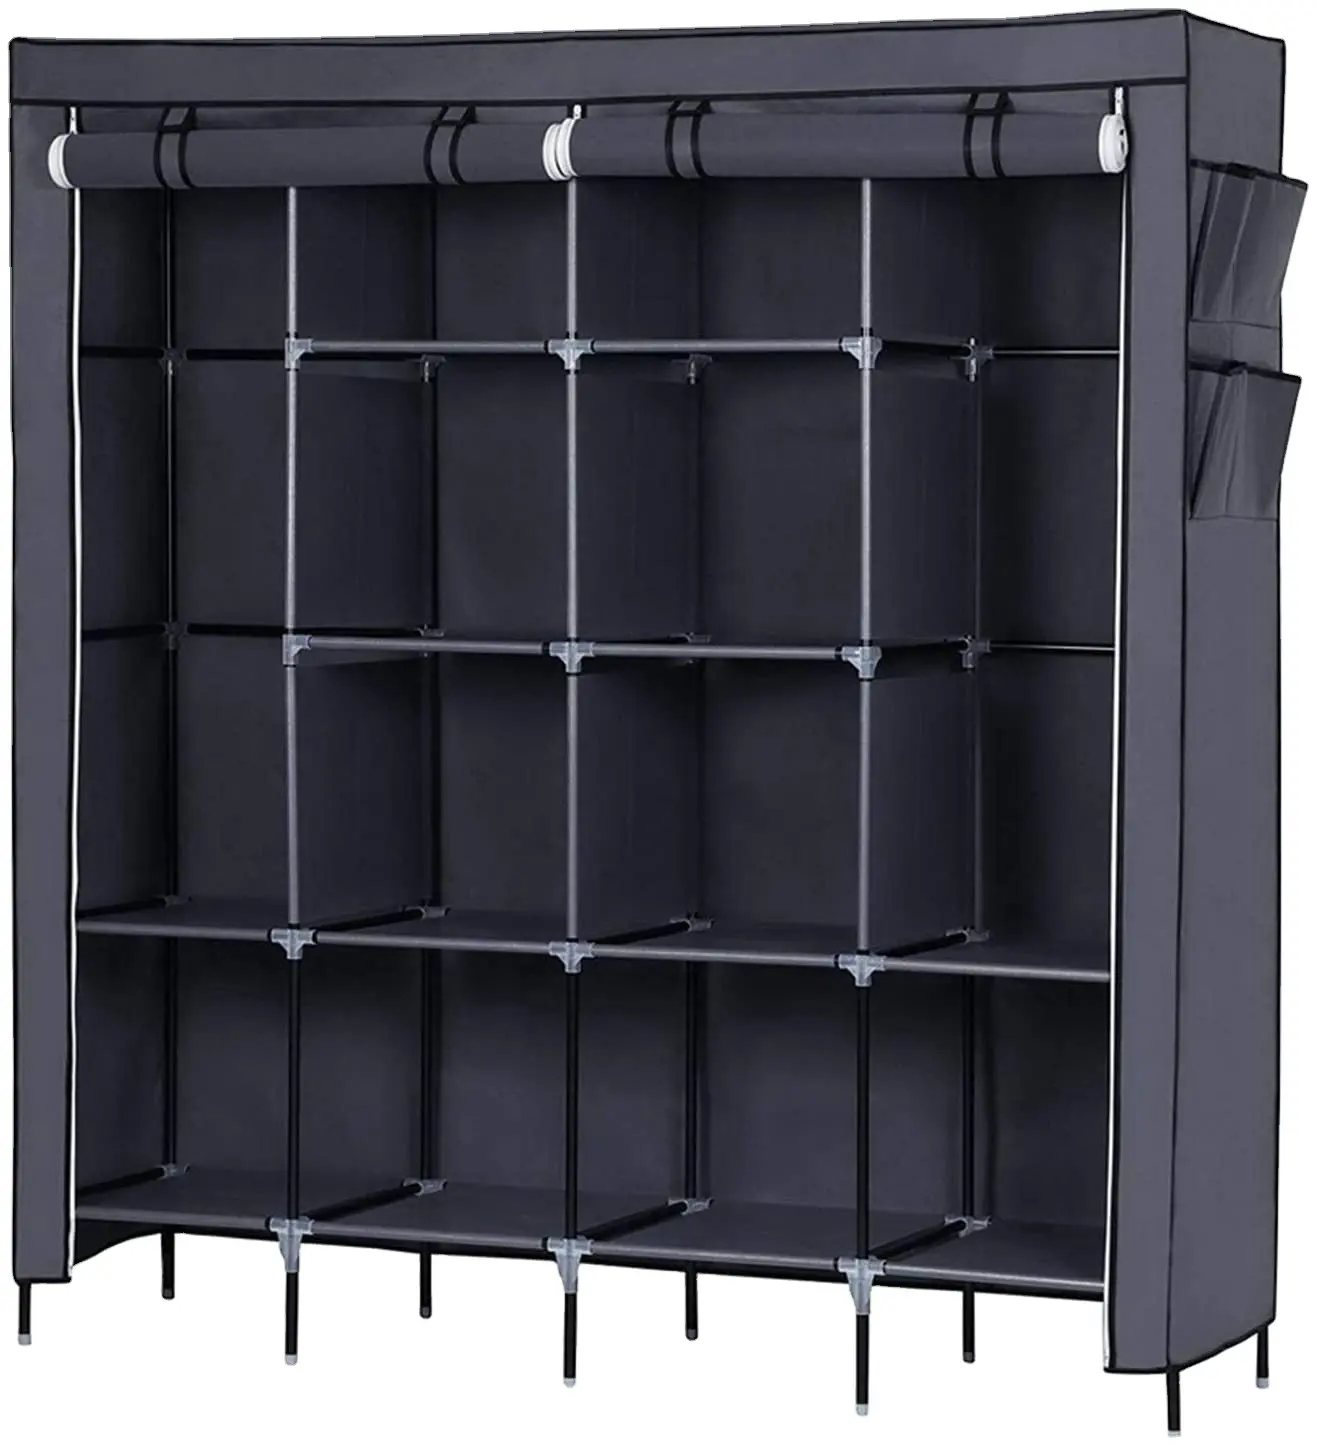 Wardrobe Bedroom Closet Organizer Plastic Clothes Storage Shelves, Non-Woven Fabric Cover with Side Pockets